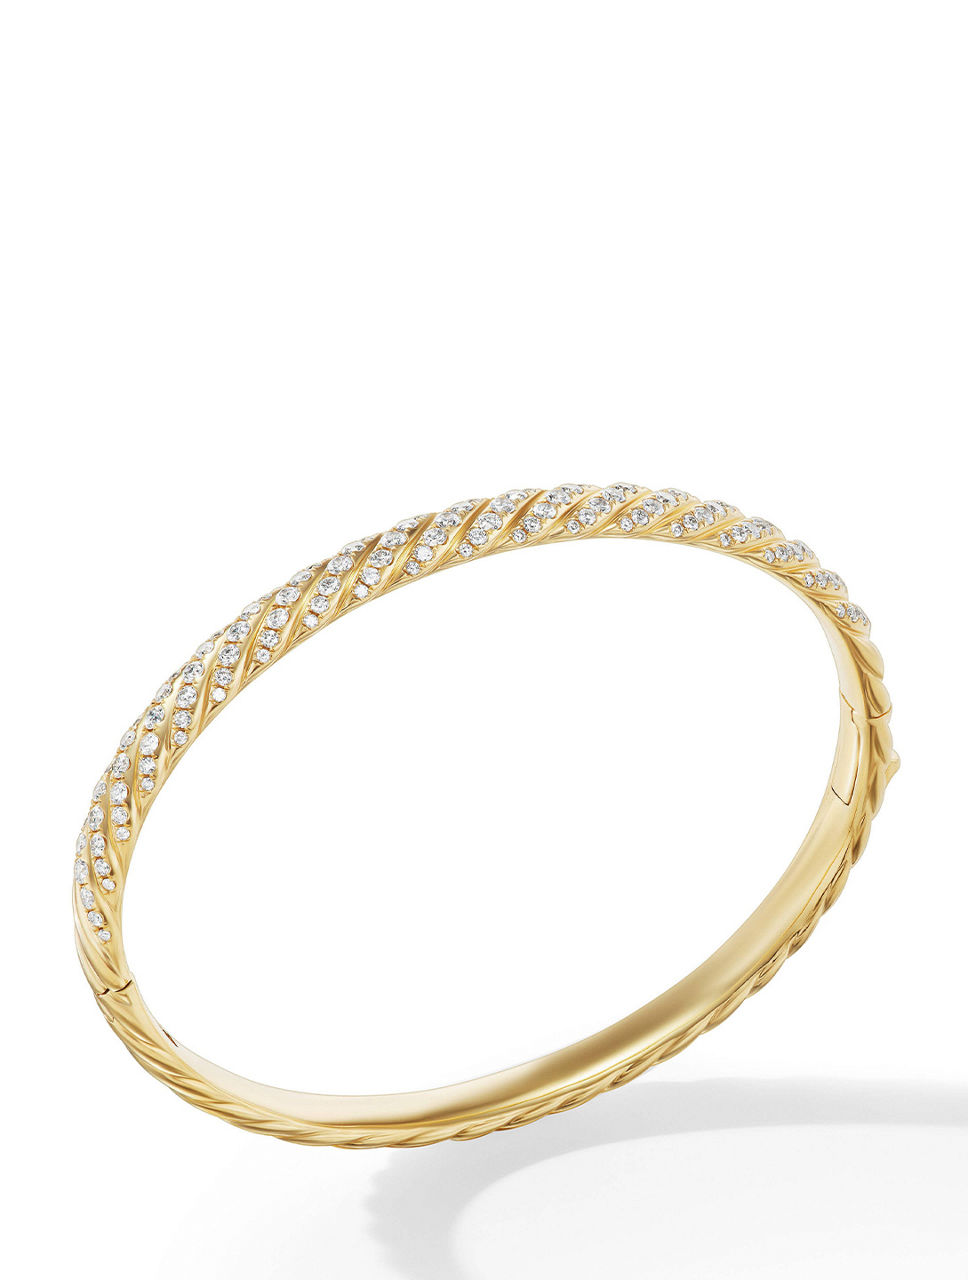 Sculpted Cable Bangle Bracelet 18k Gold With Diamonds